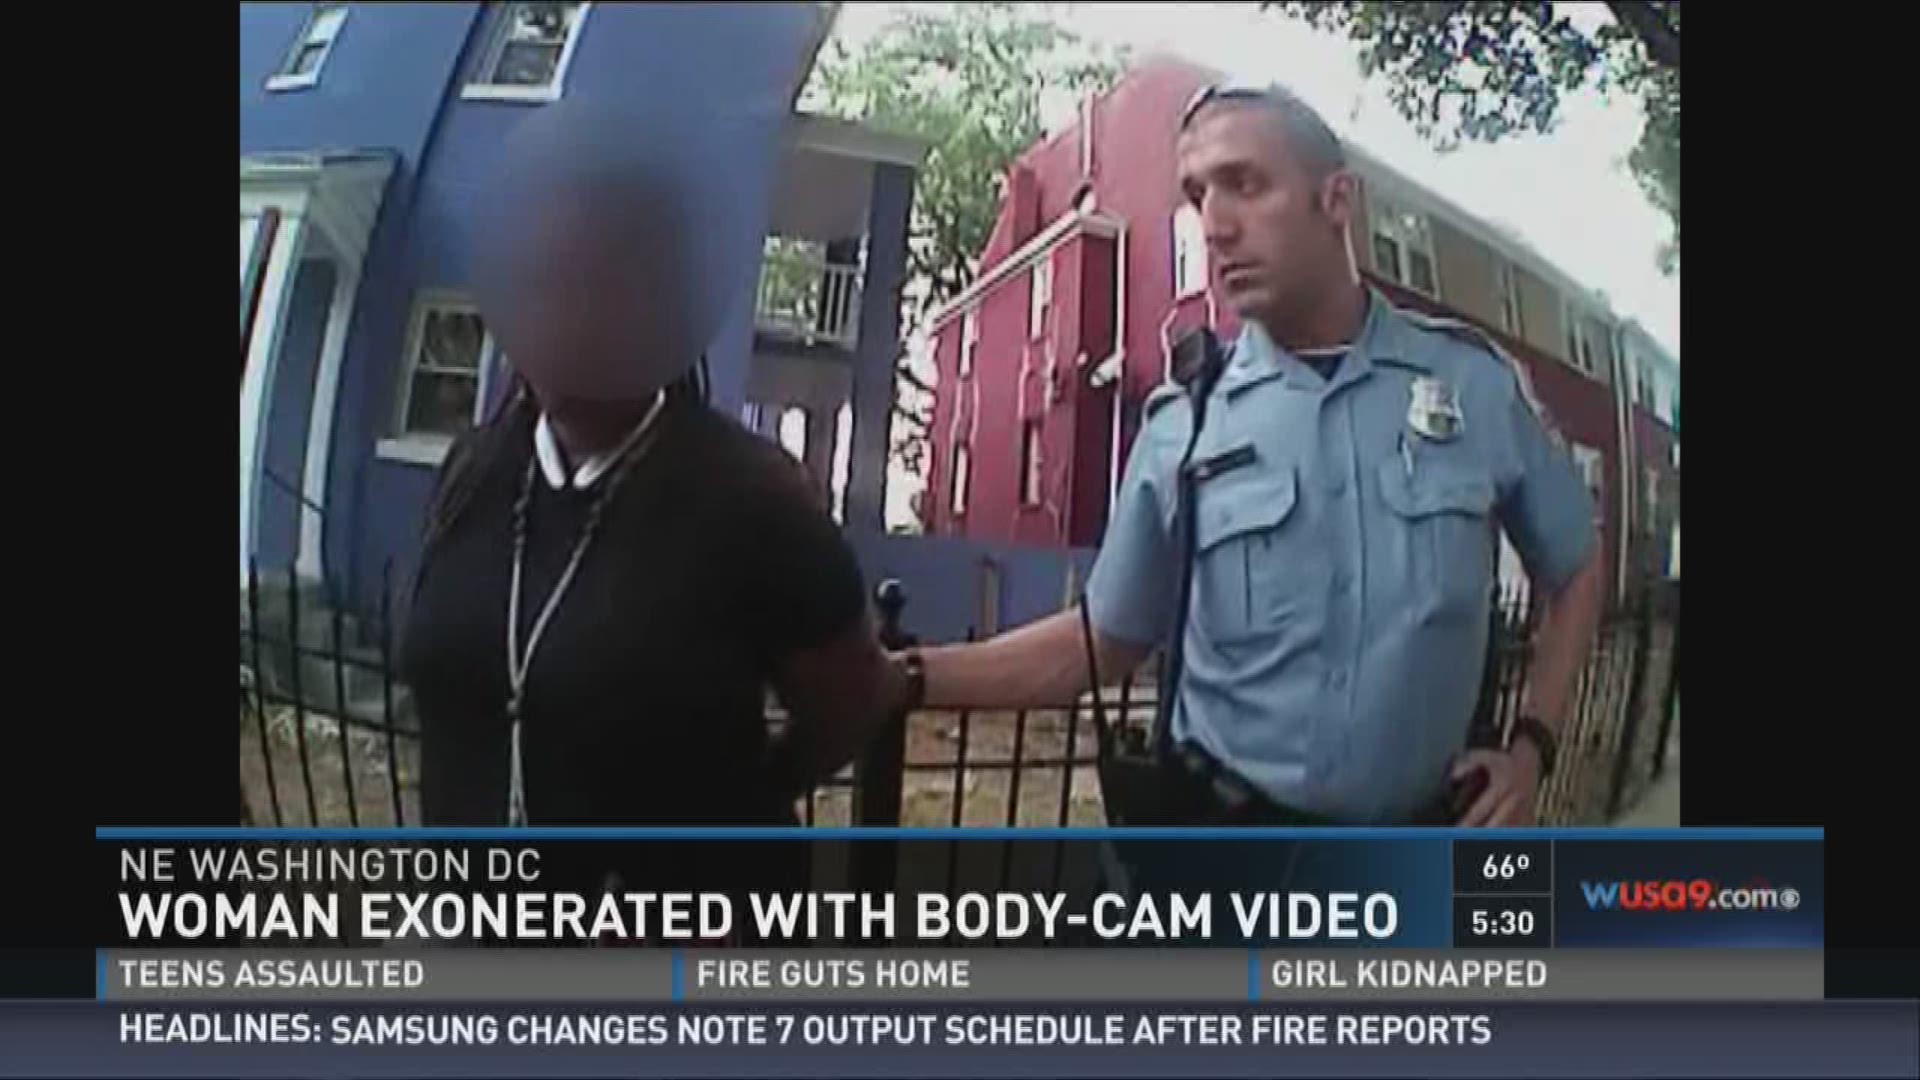 The case was headed to trial until her attorney got ahold of the body camera footage.